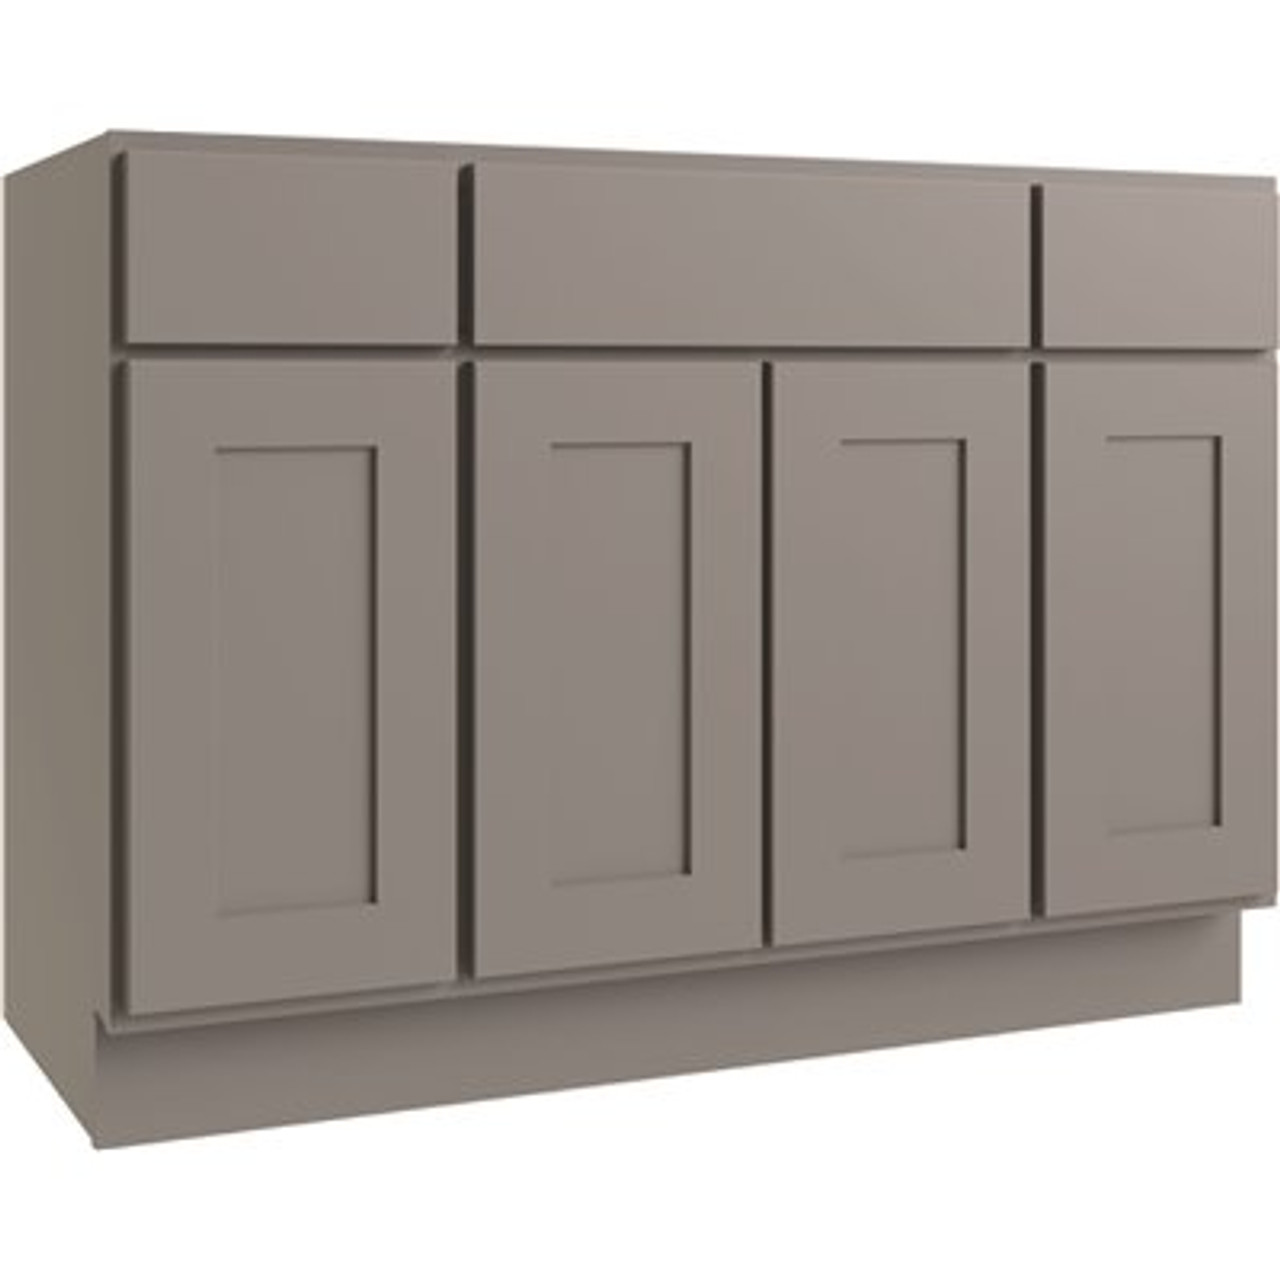 CNC Cabinetry Luxor Vanity Base Cabinet, 48"w X 32.5"h X 21"d, Shaker Misty Grey